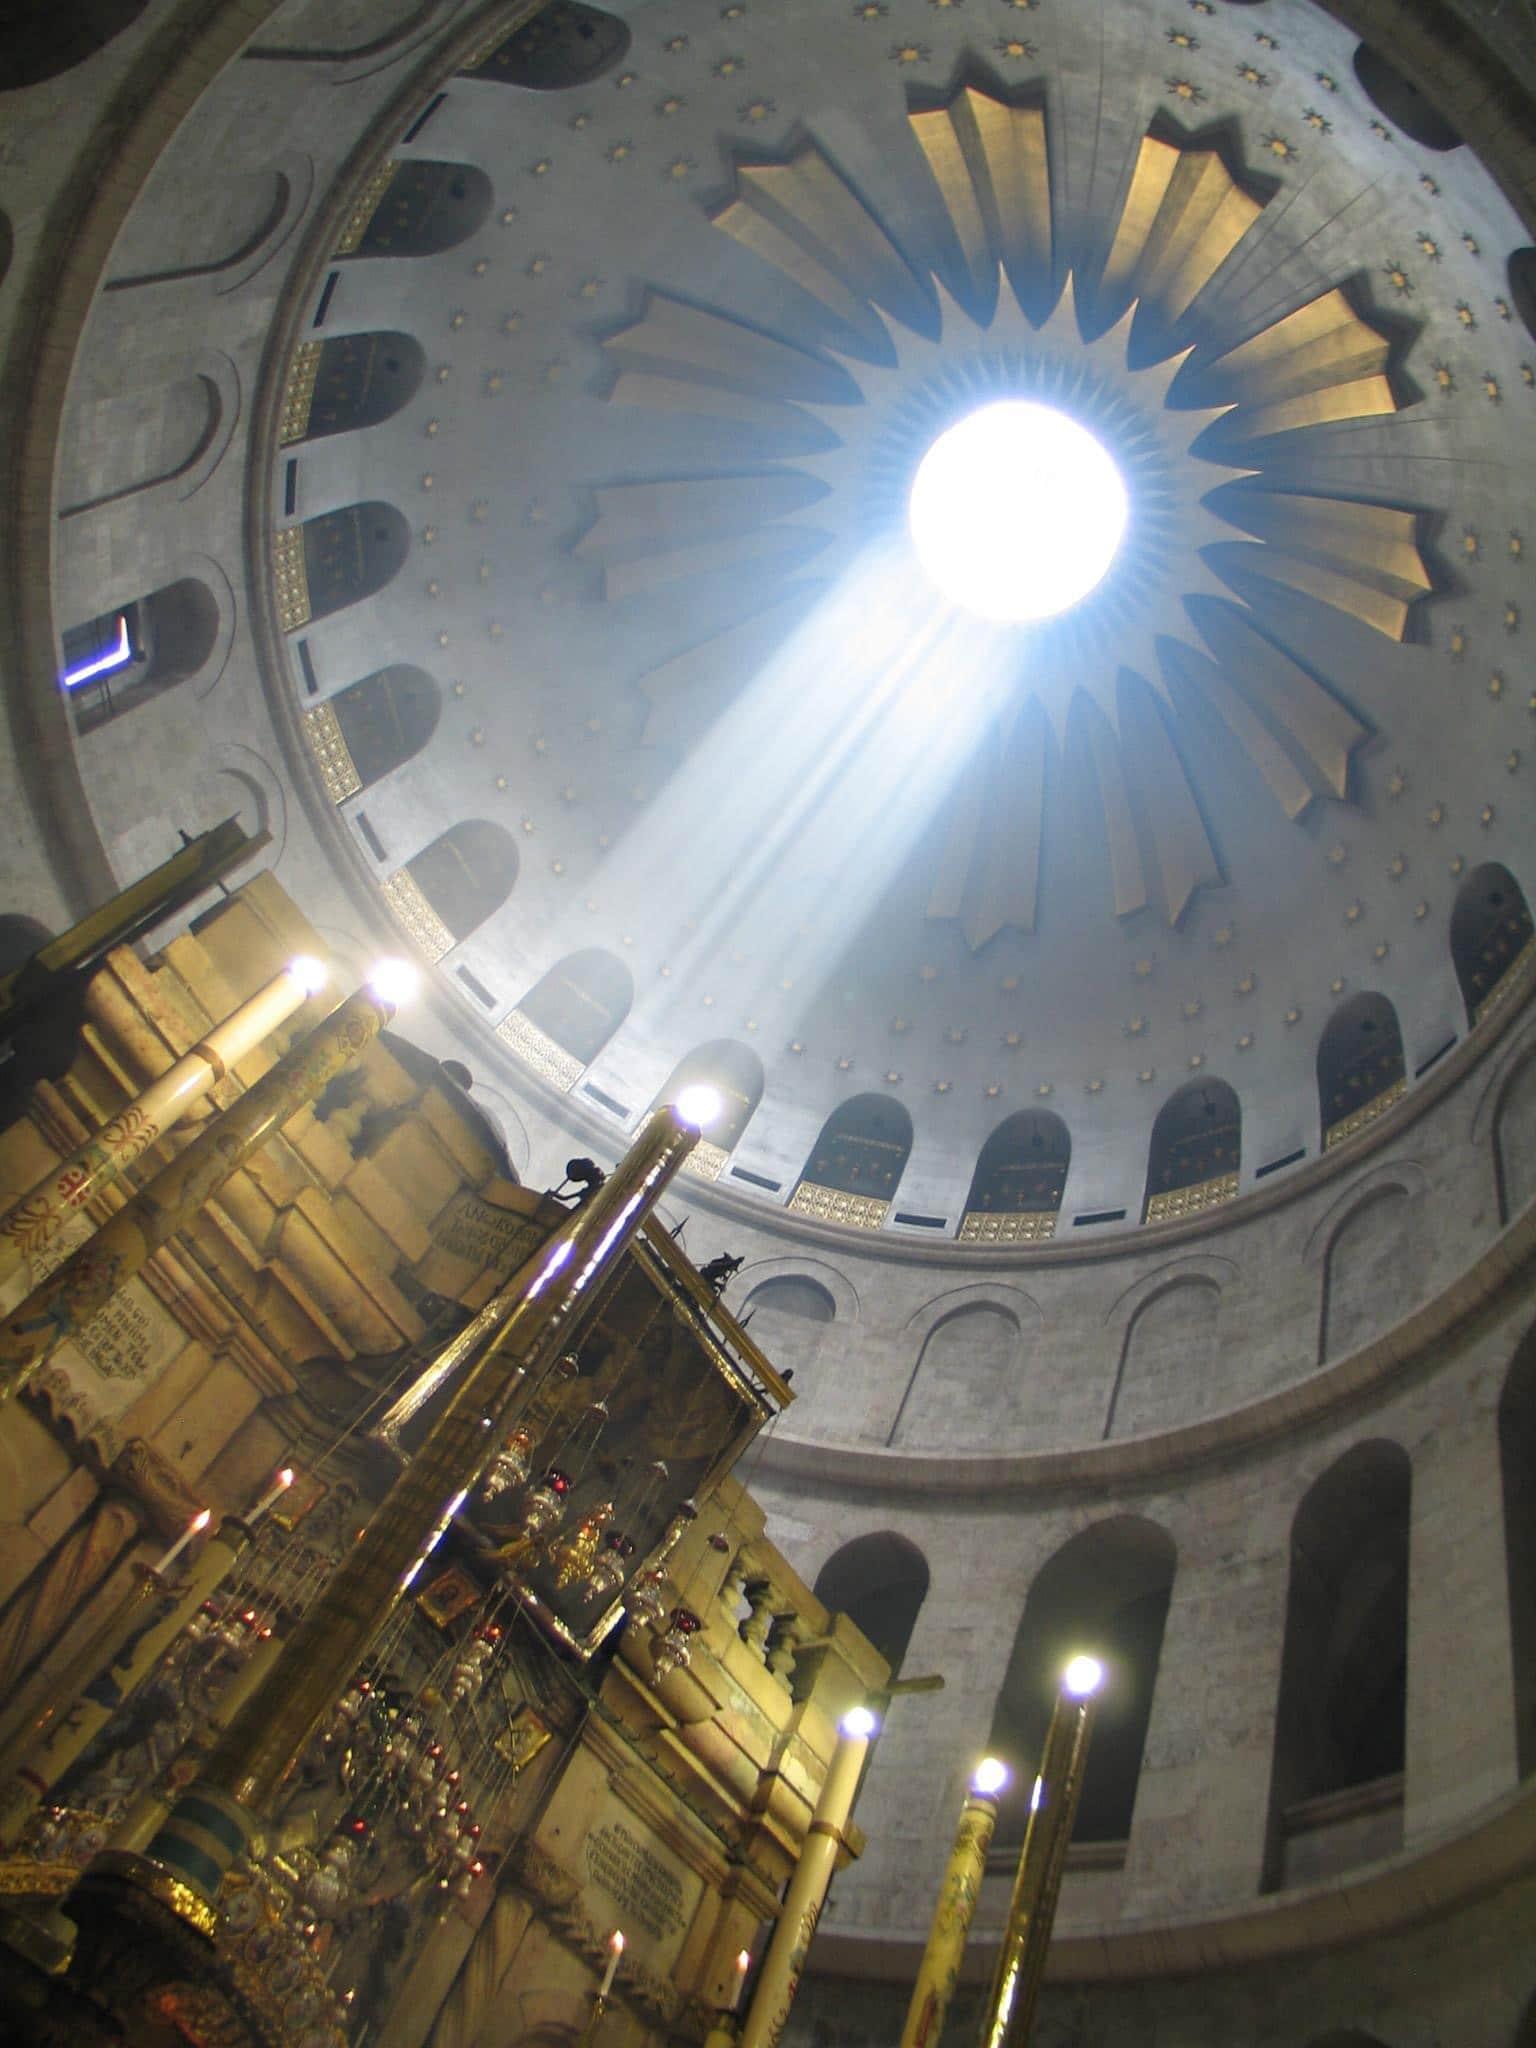 Let’s restore together the objects of the Holy Sepulcher